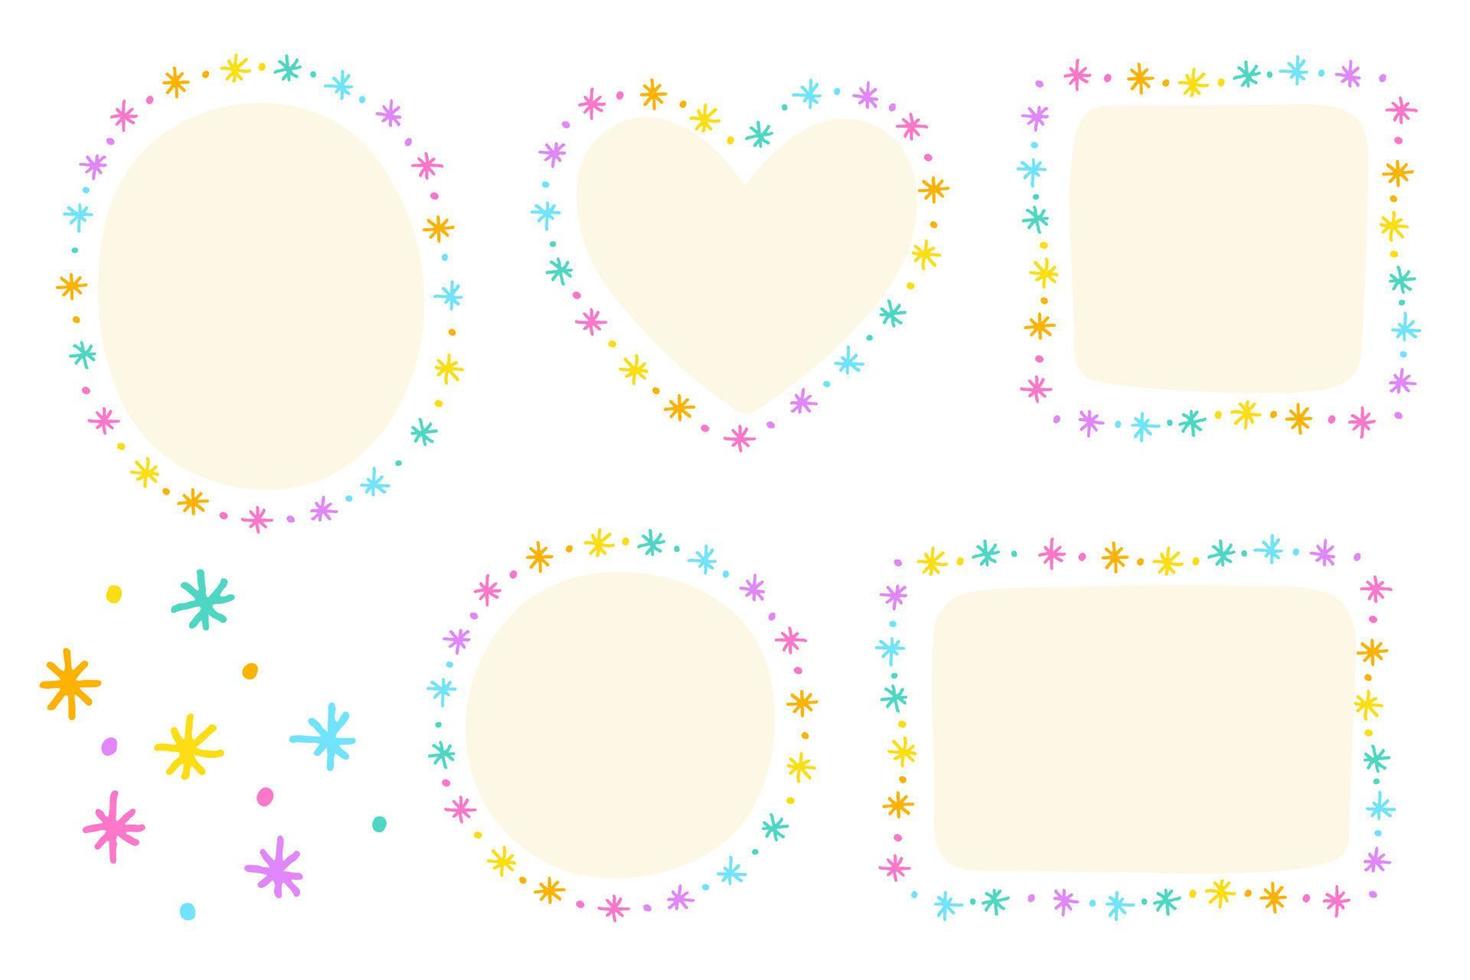 Bright Star Asterisk Sparkle Dot Dash Doodle Hand Drawing Drawn Heart Circle Square Oval Rectangle Sticky note Shape Borders Frames Plate Sticky Note Set Collection Background Vector Illustration